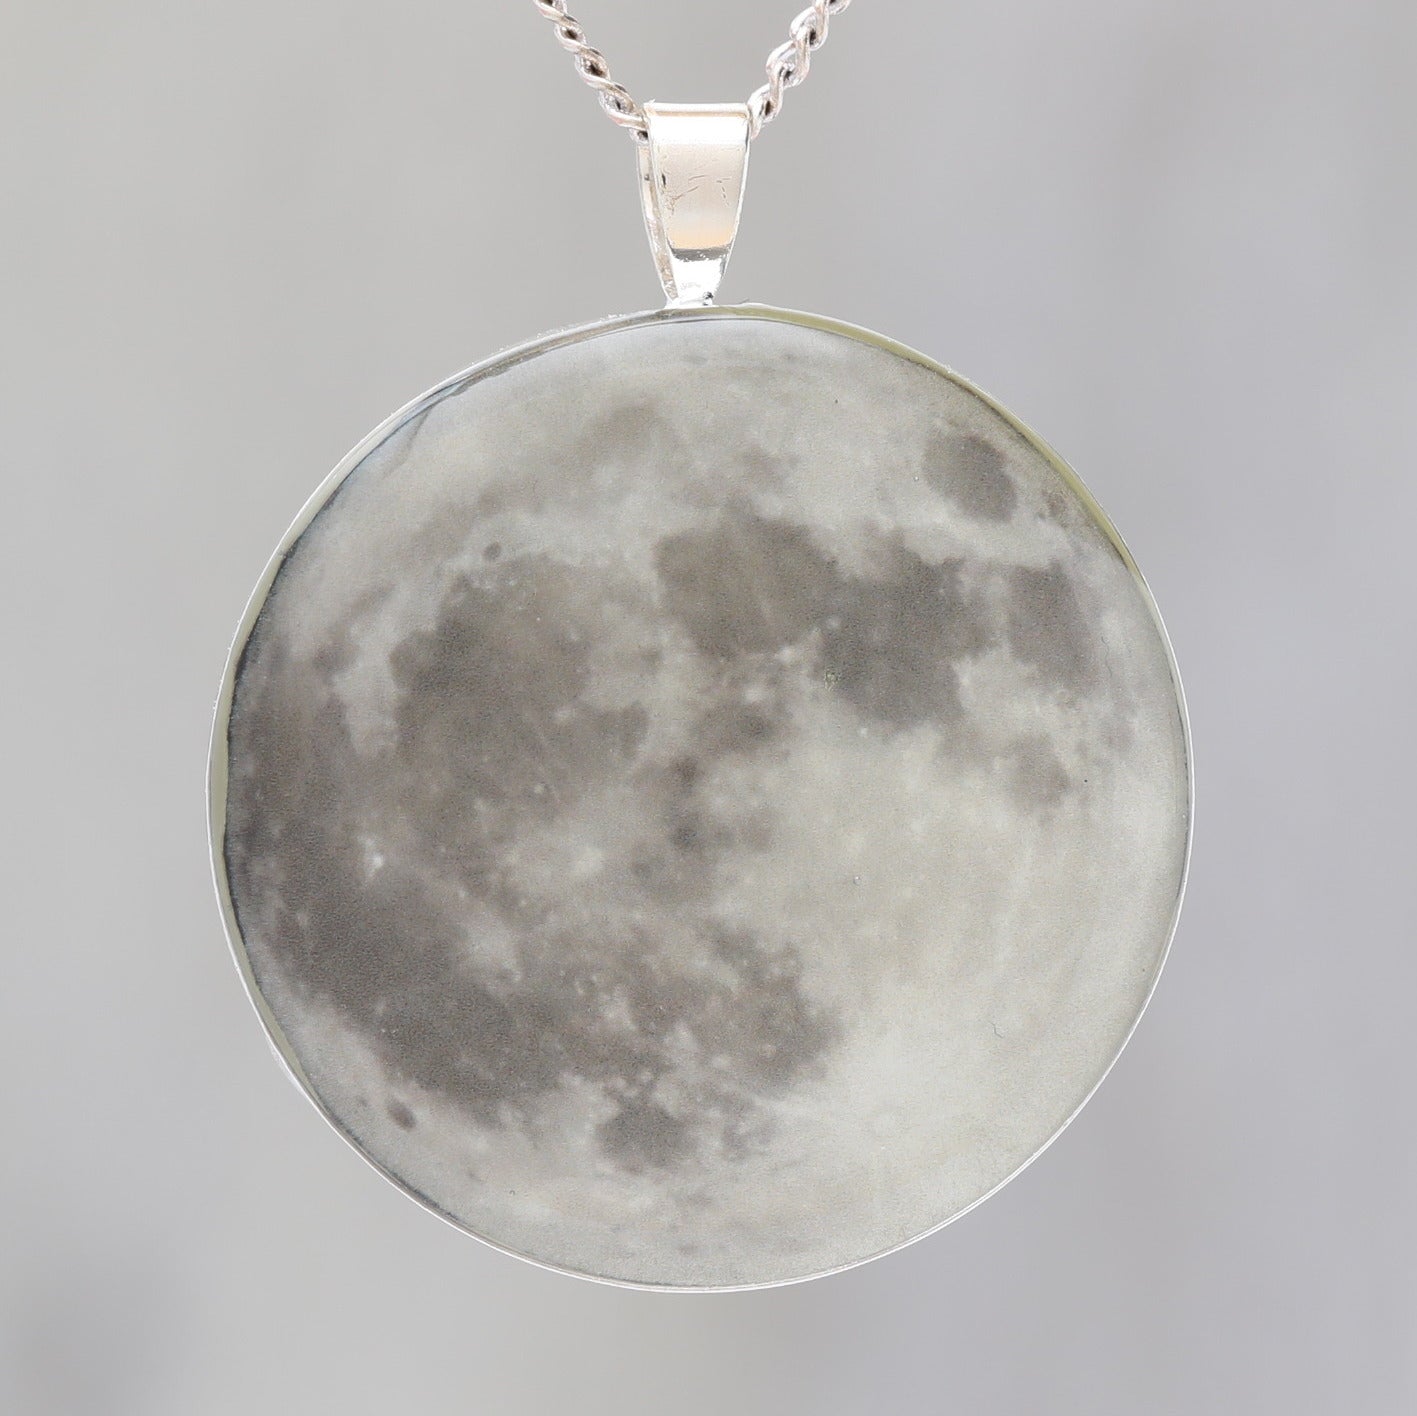 Supermoon!  Silver-plated pendant necklace with a beautiful photograph of the full moon